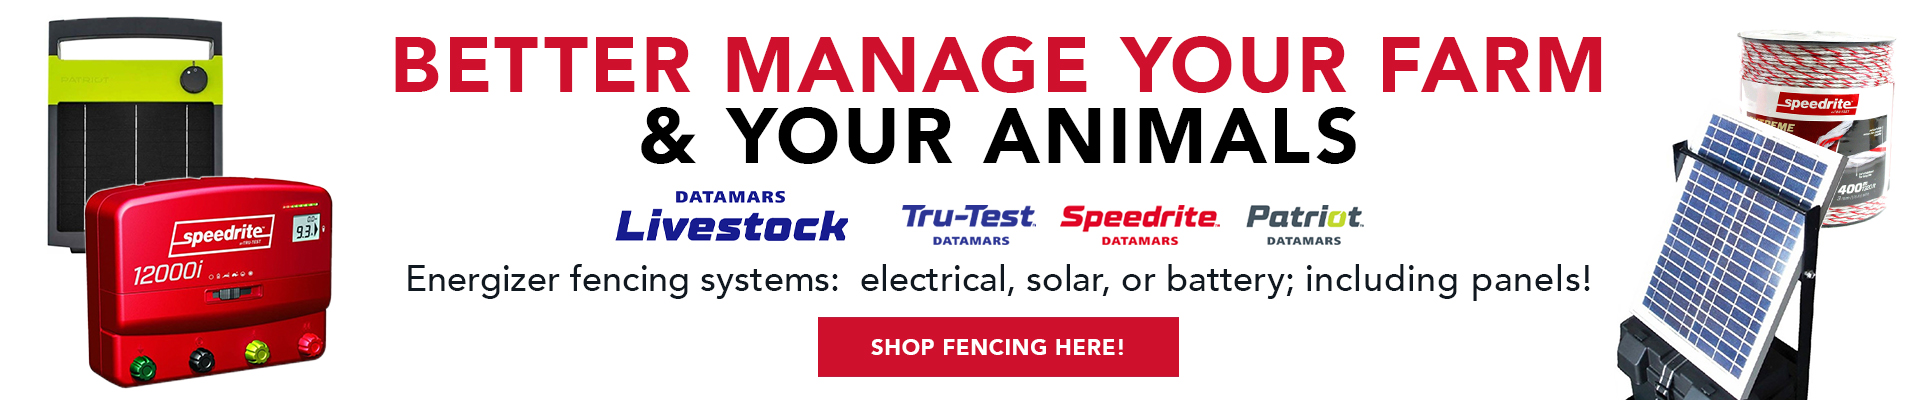 Shop popular fencing supplies to keep your cattle & livestock secure. Multiple types of electrice & solar fencers available